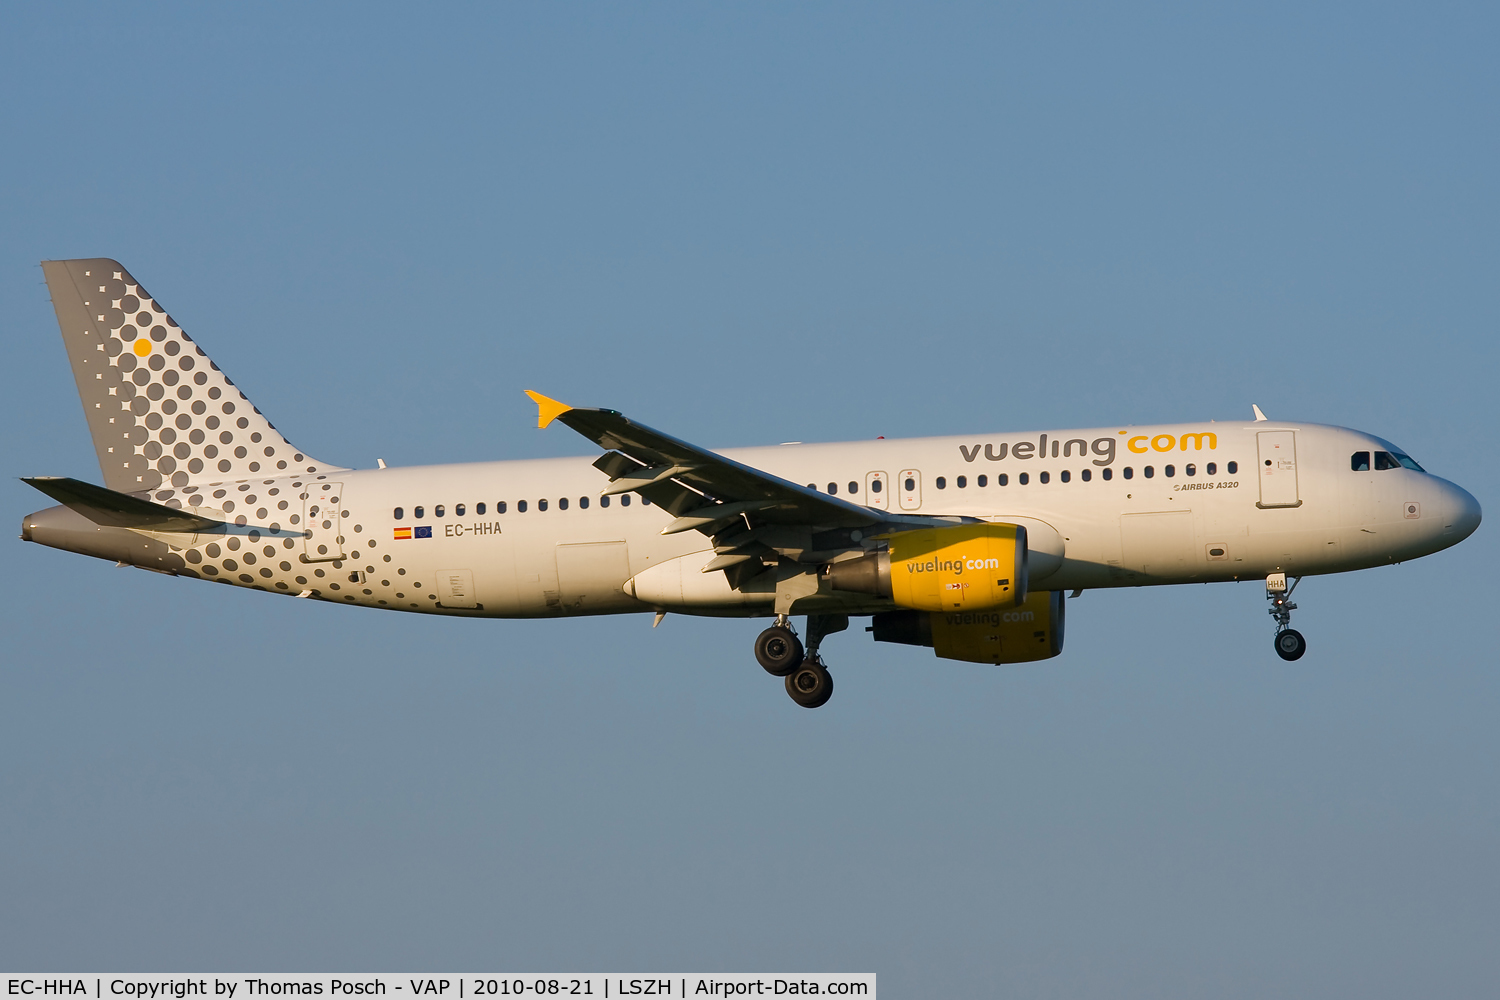 EC-HHA, 2000 Airbus A320-214 C/N 1221, Vueling Airlines